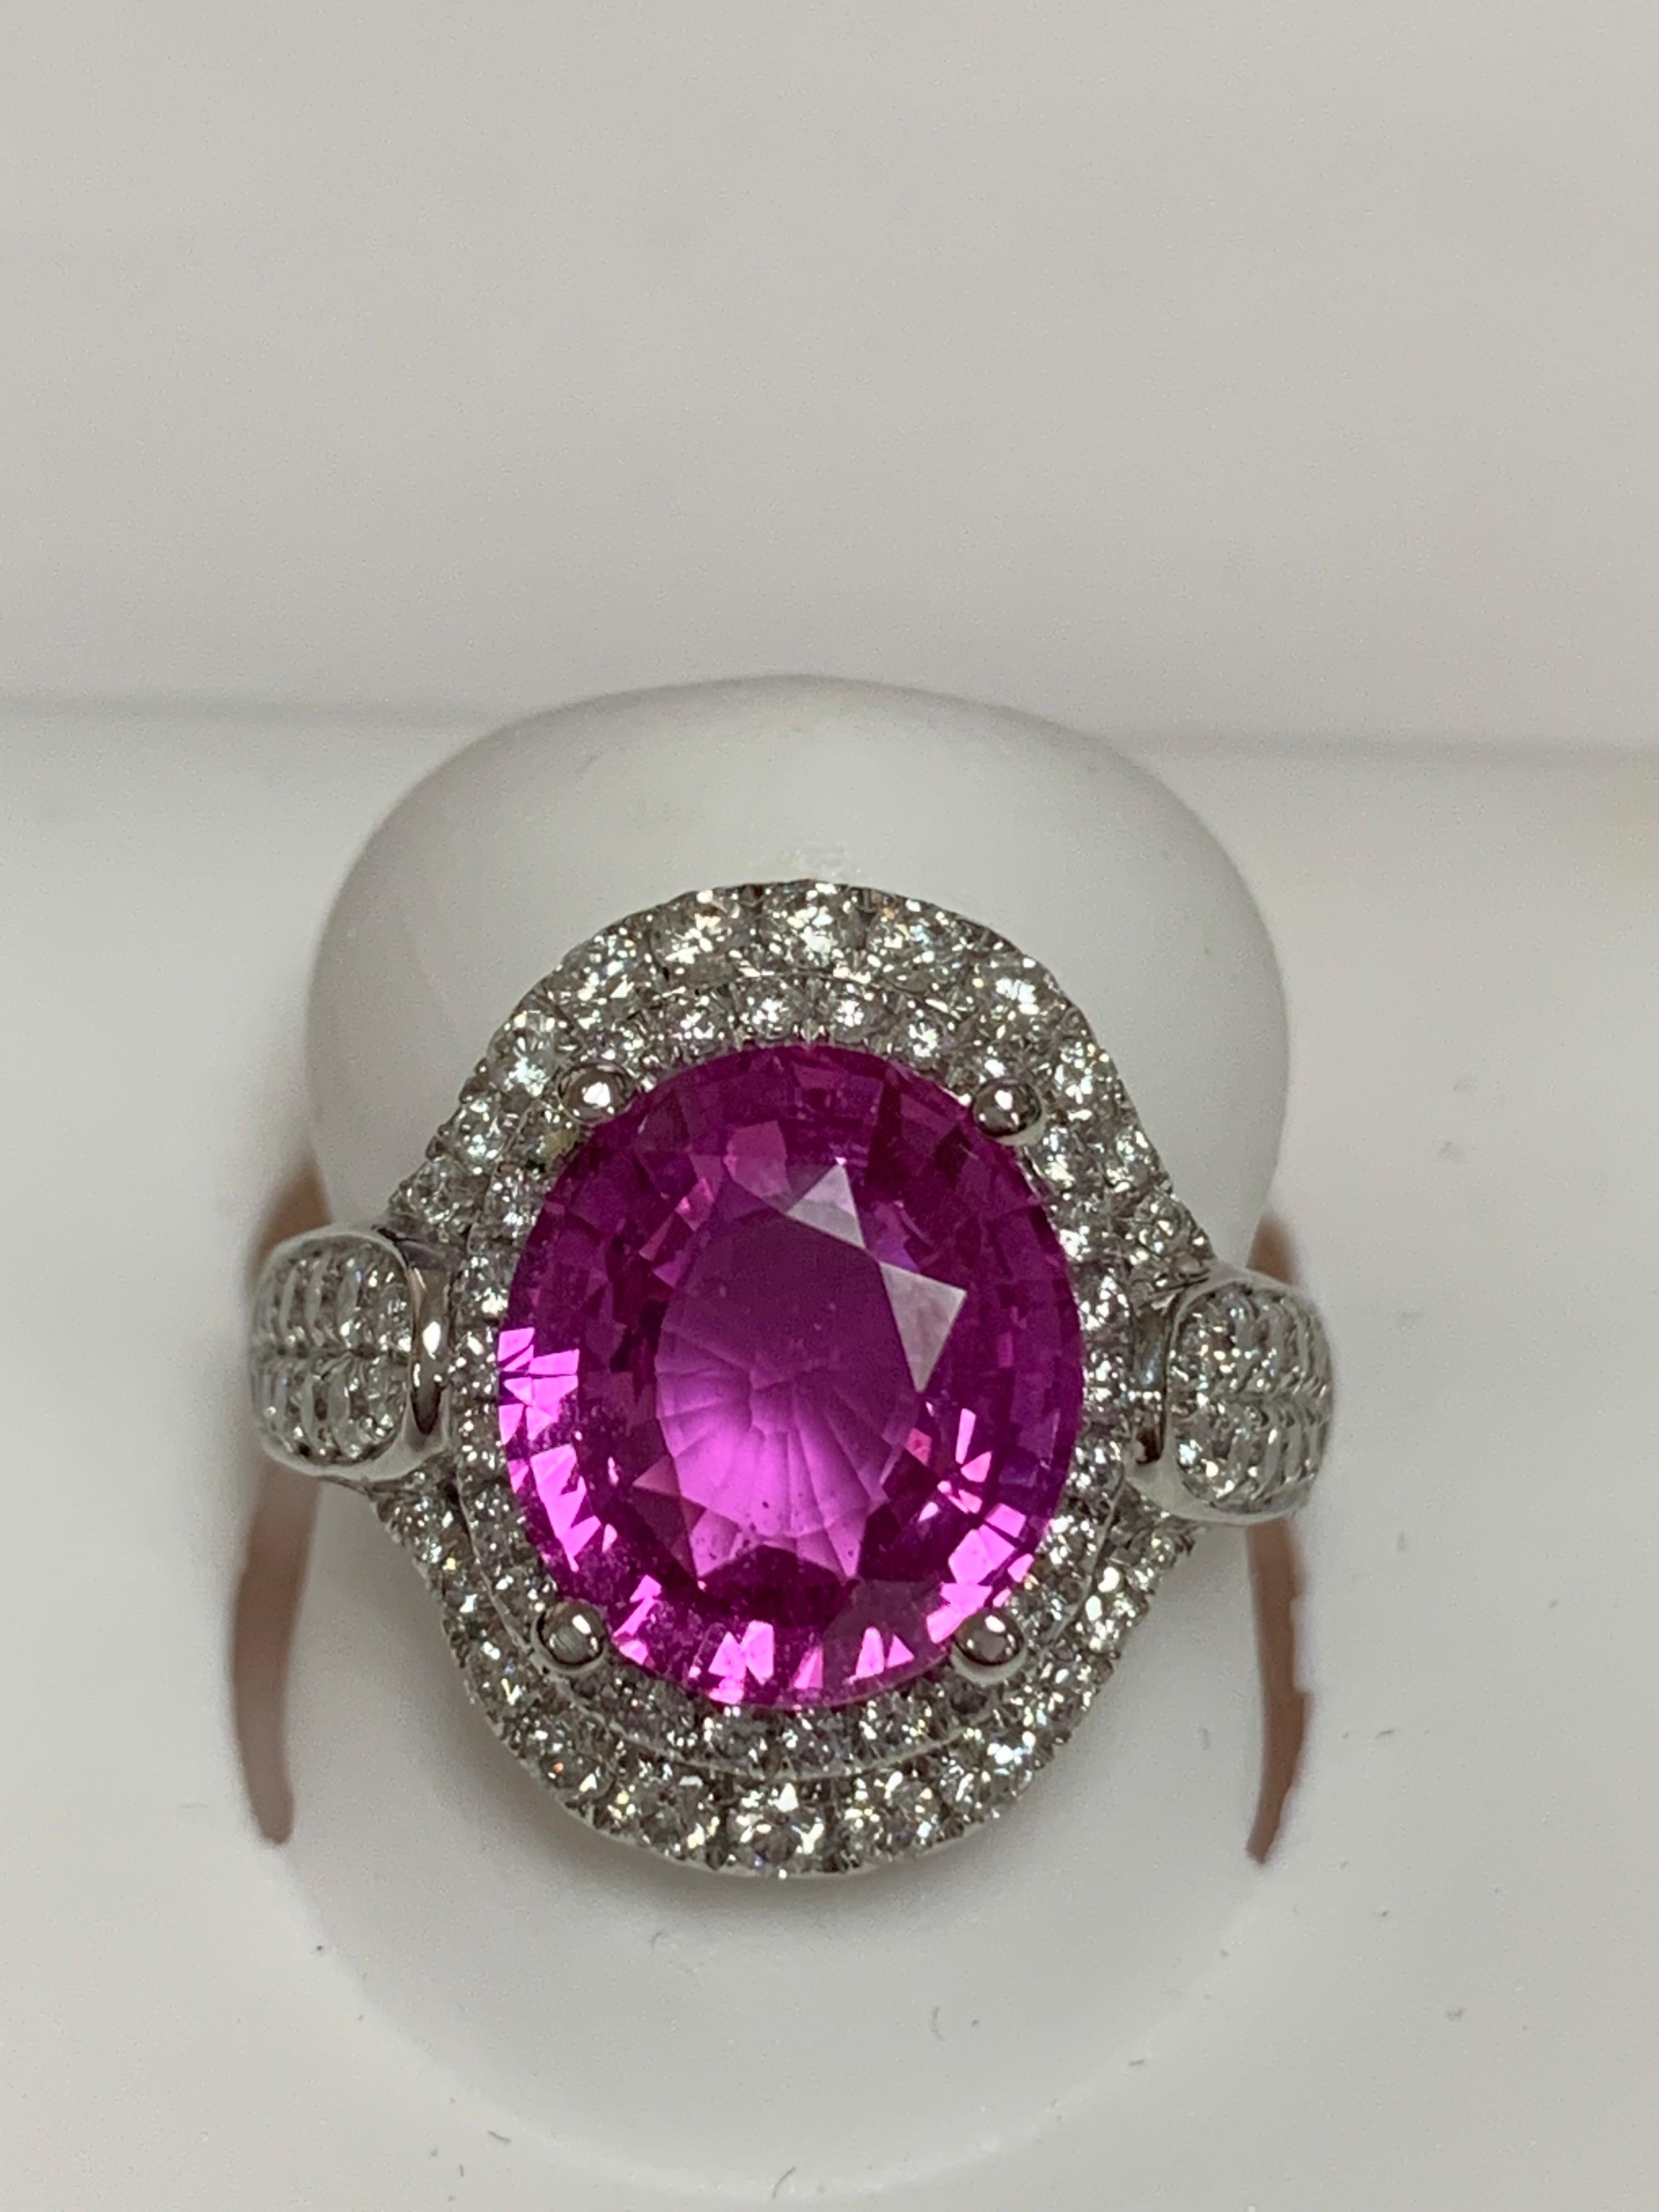 GIA Certified 5.12 Carat Pink Sapphire and 0.82 Carat round white diamond set in 14 Karat white gold, The Ring is hand crafted and one of a kind, The Ring can be resized if needed.